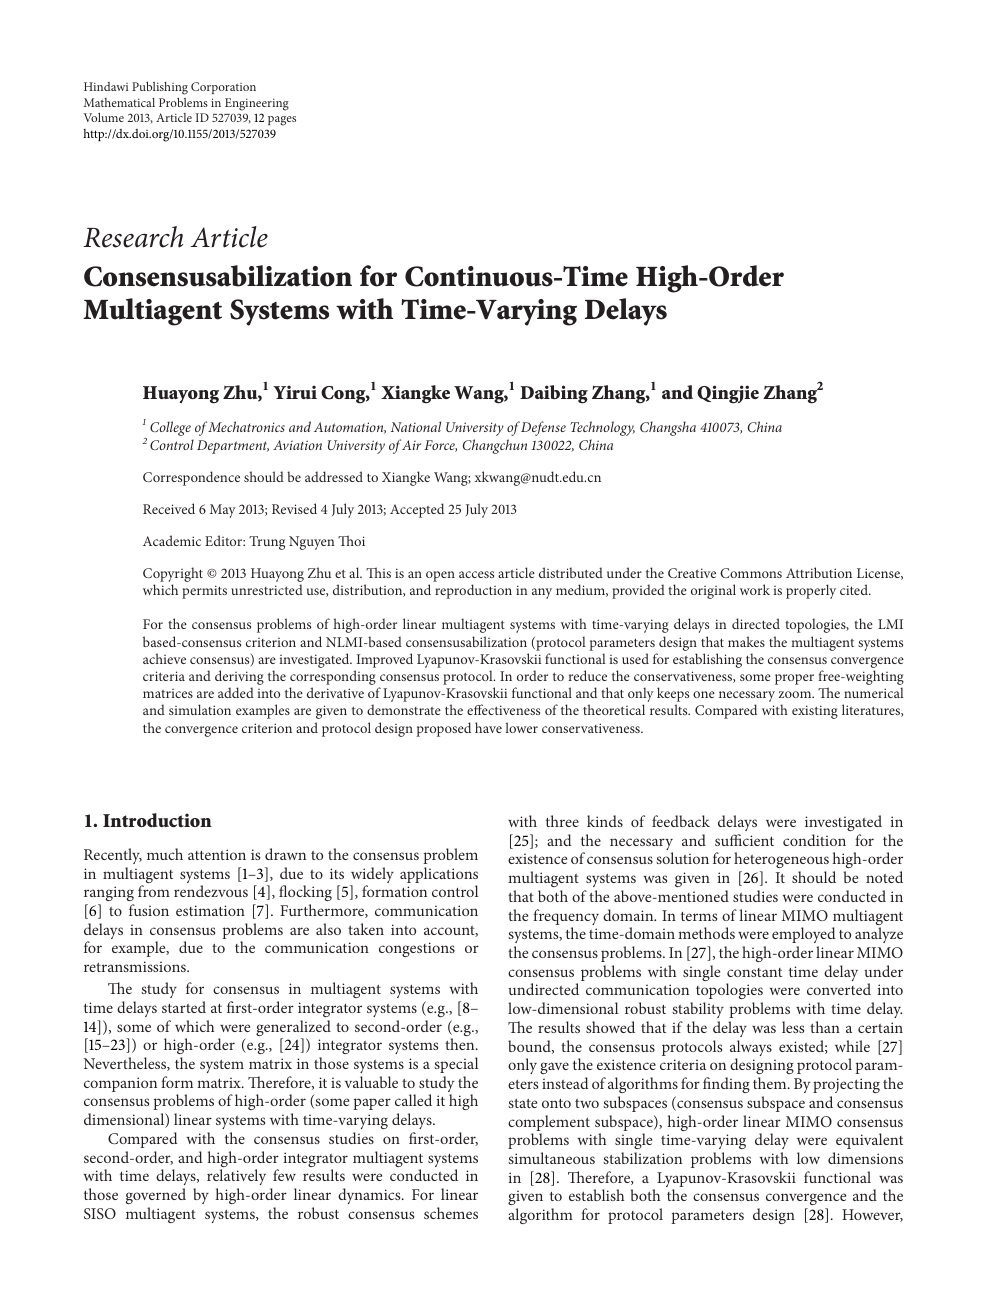 Consensusabilization For Continuous Time High Order Multiagent Systems With Time Varying Delays Topic Of Research Paper In Mathematics Download Scholarly Article Pdf And Read For Free On Cyberleninka Open Science Hub